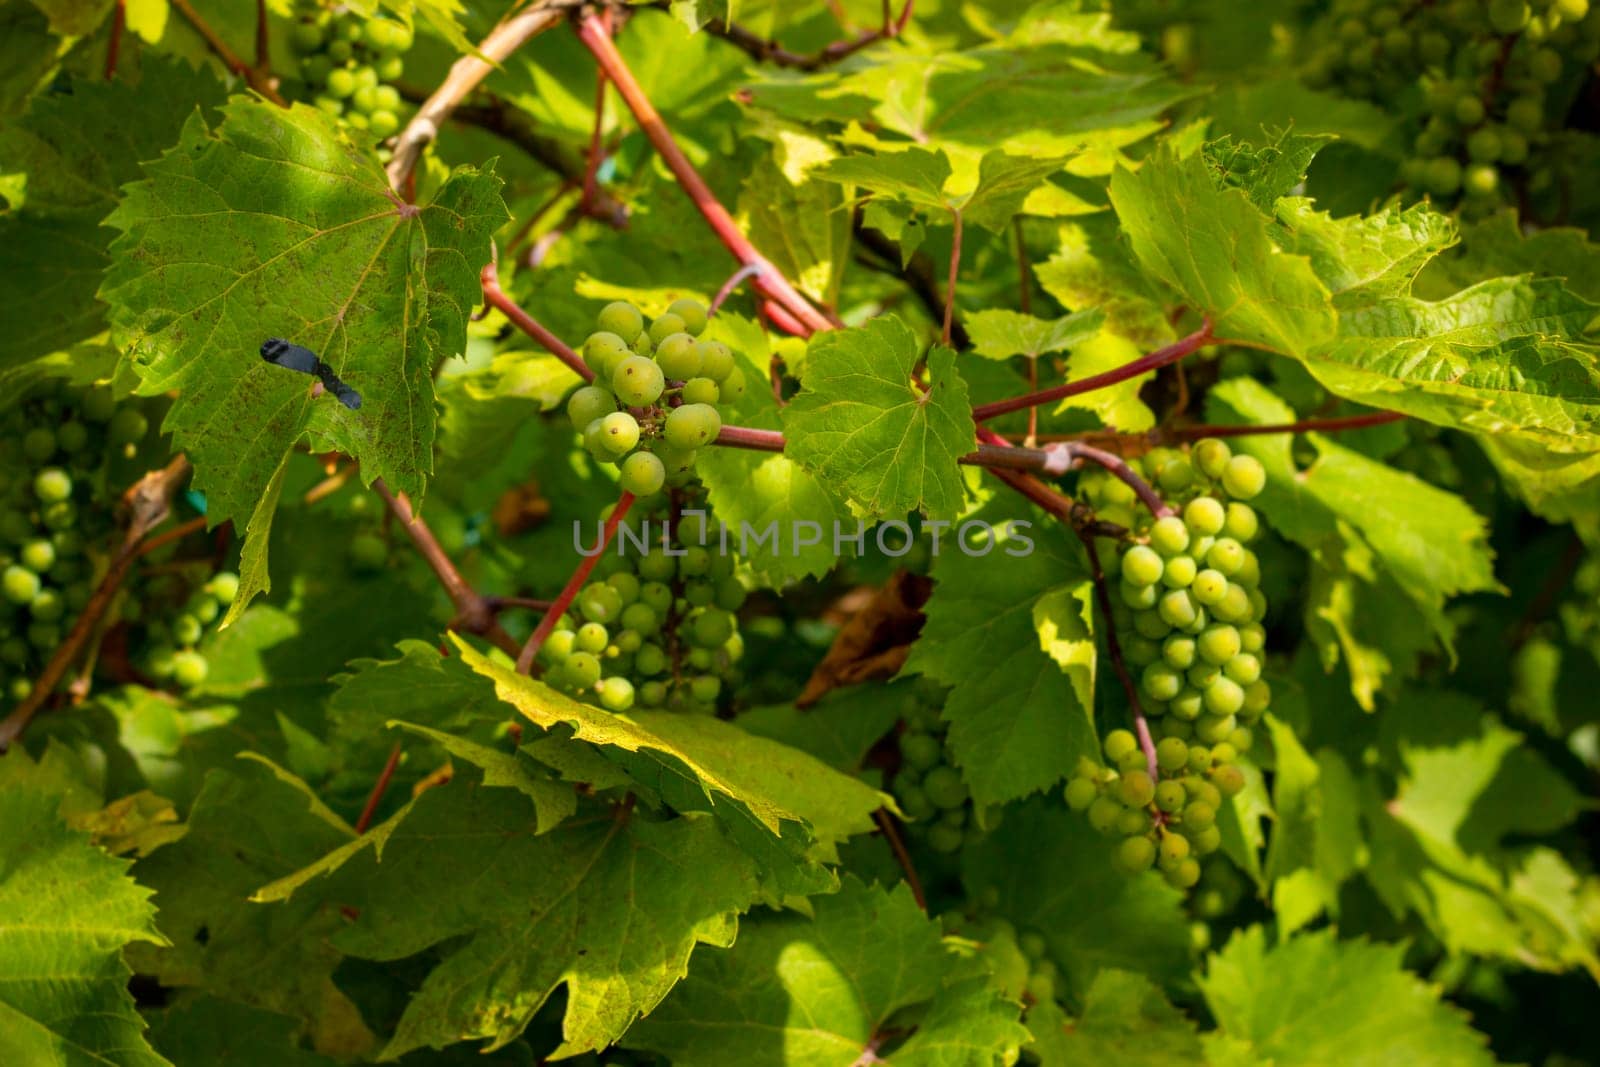 Green unripe wine grapes growing on plant. Natural grape hanging and ripening on branch